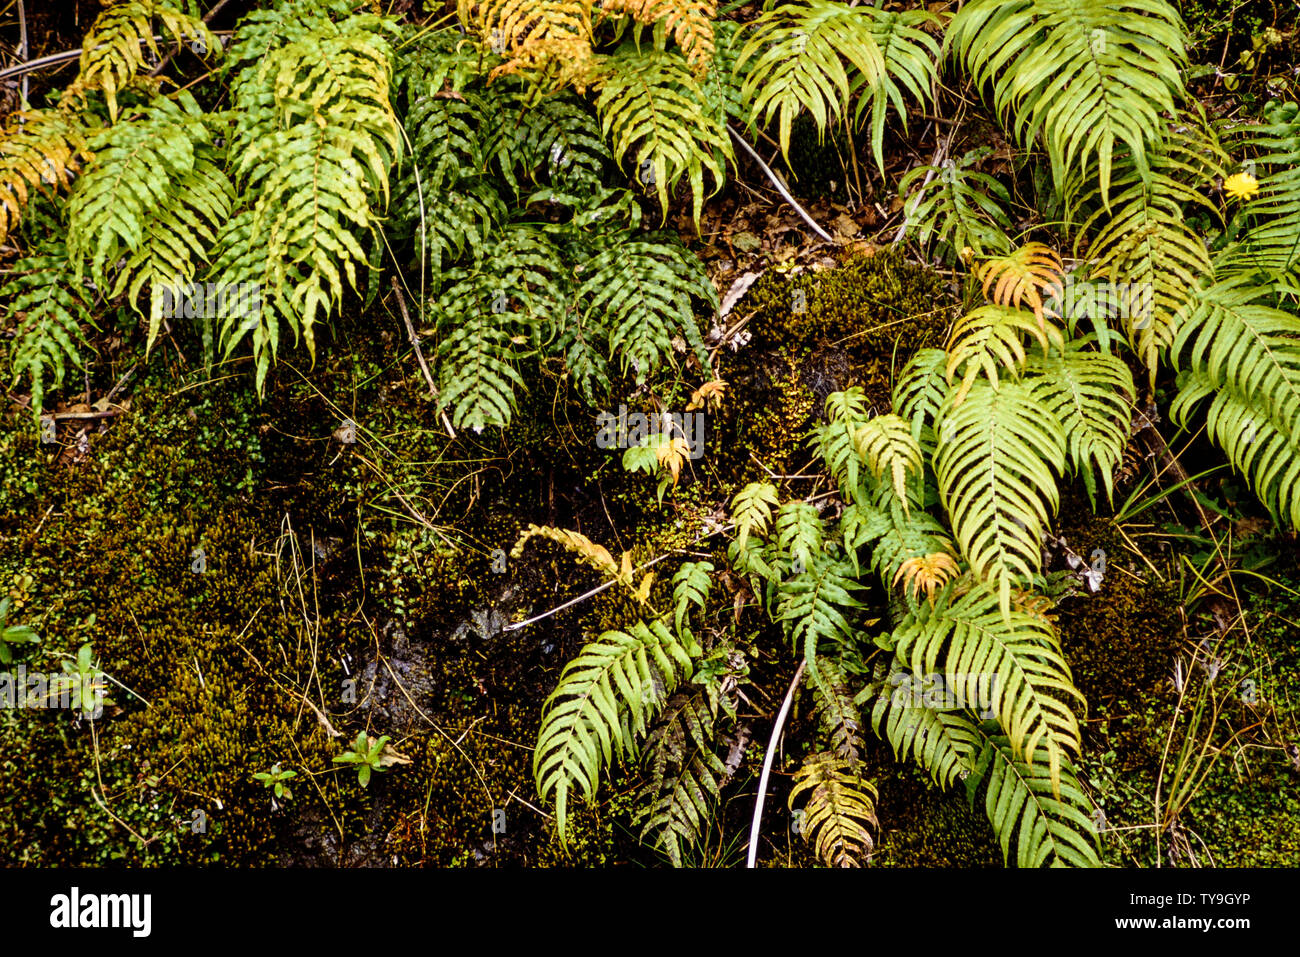 New Zealand, South Island. Westland Tai Poutini National Park which contains many elements of temperate rainforest. such as ferns growing in the warm Stock Photo